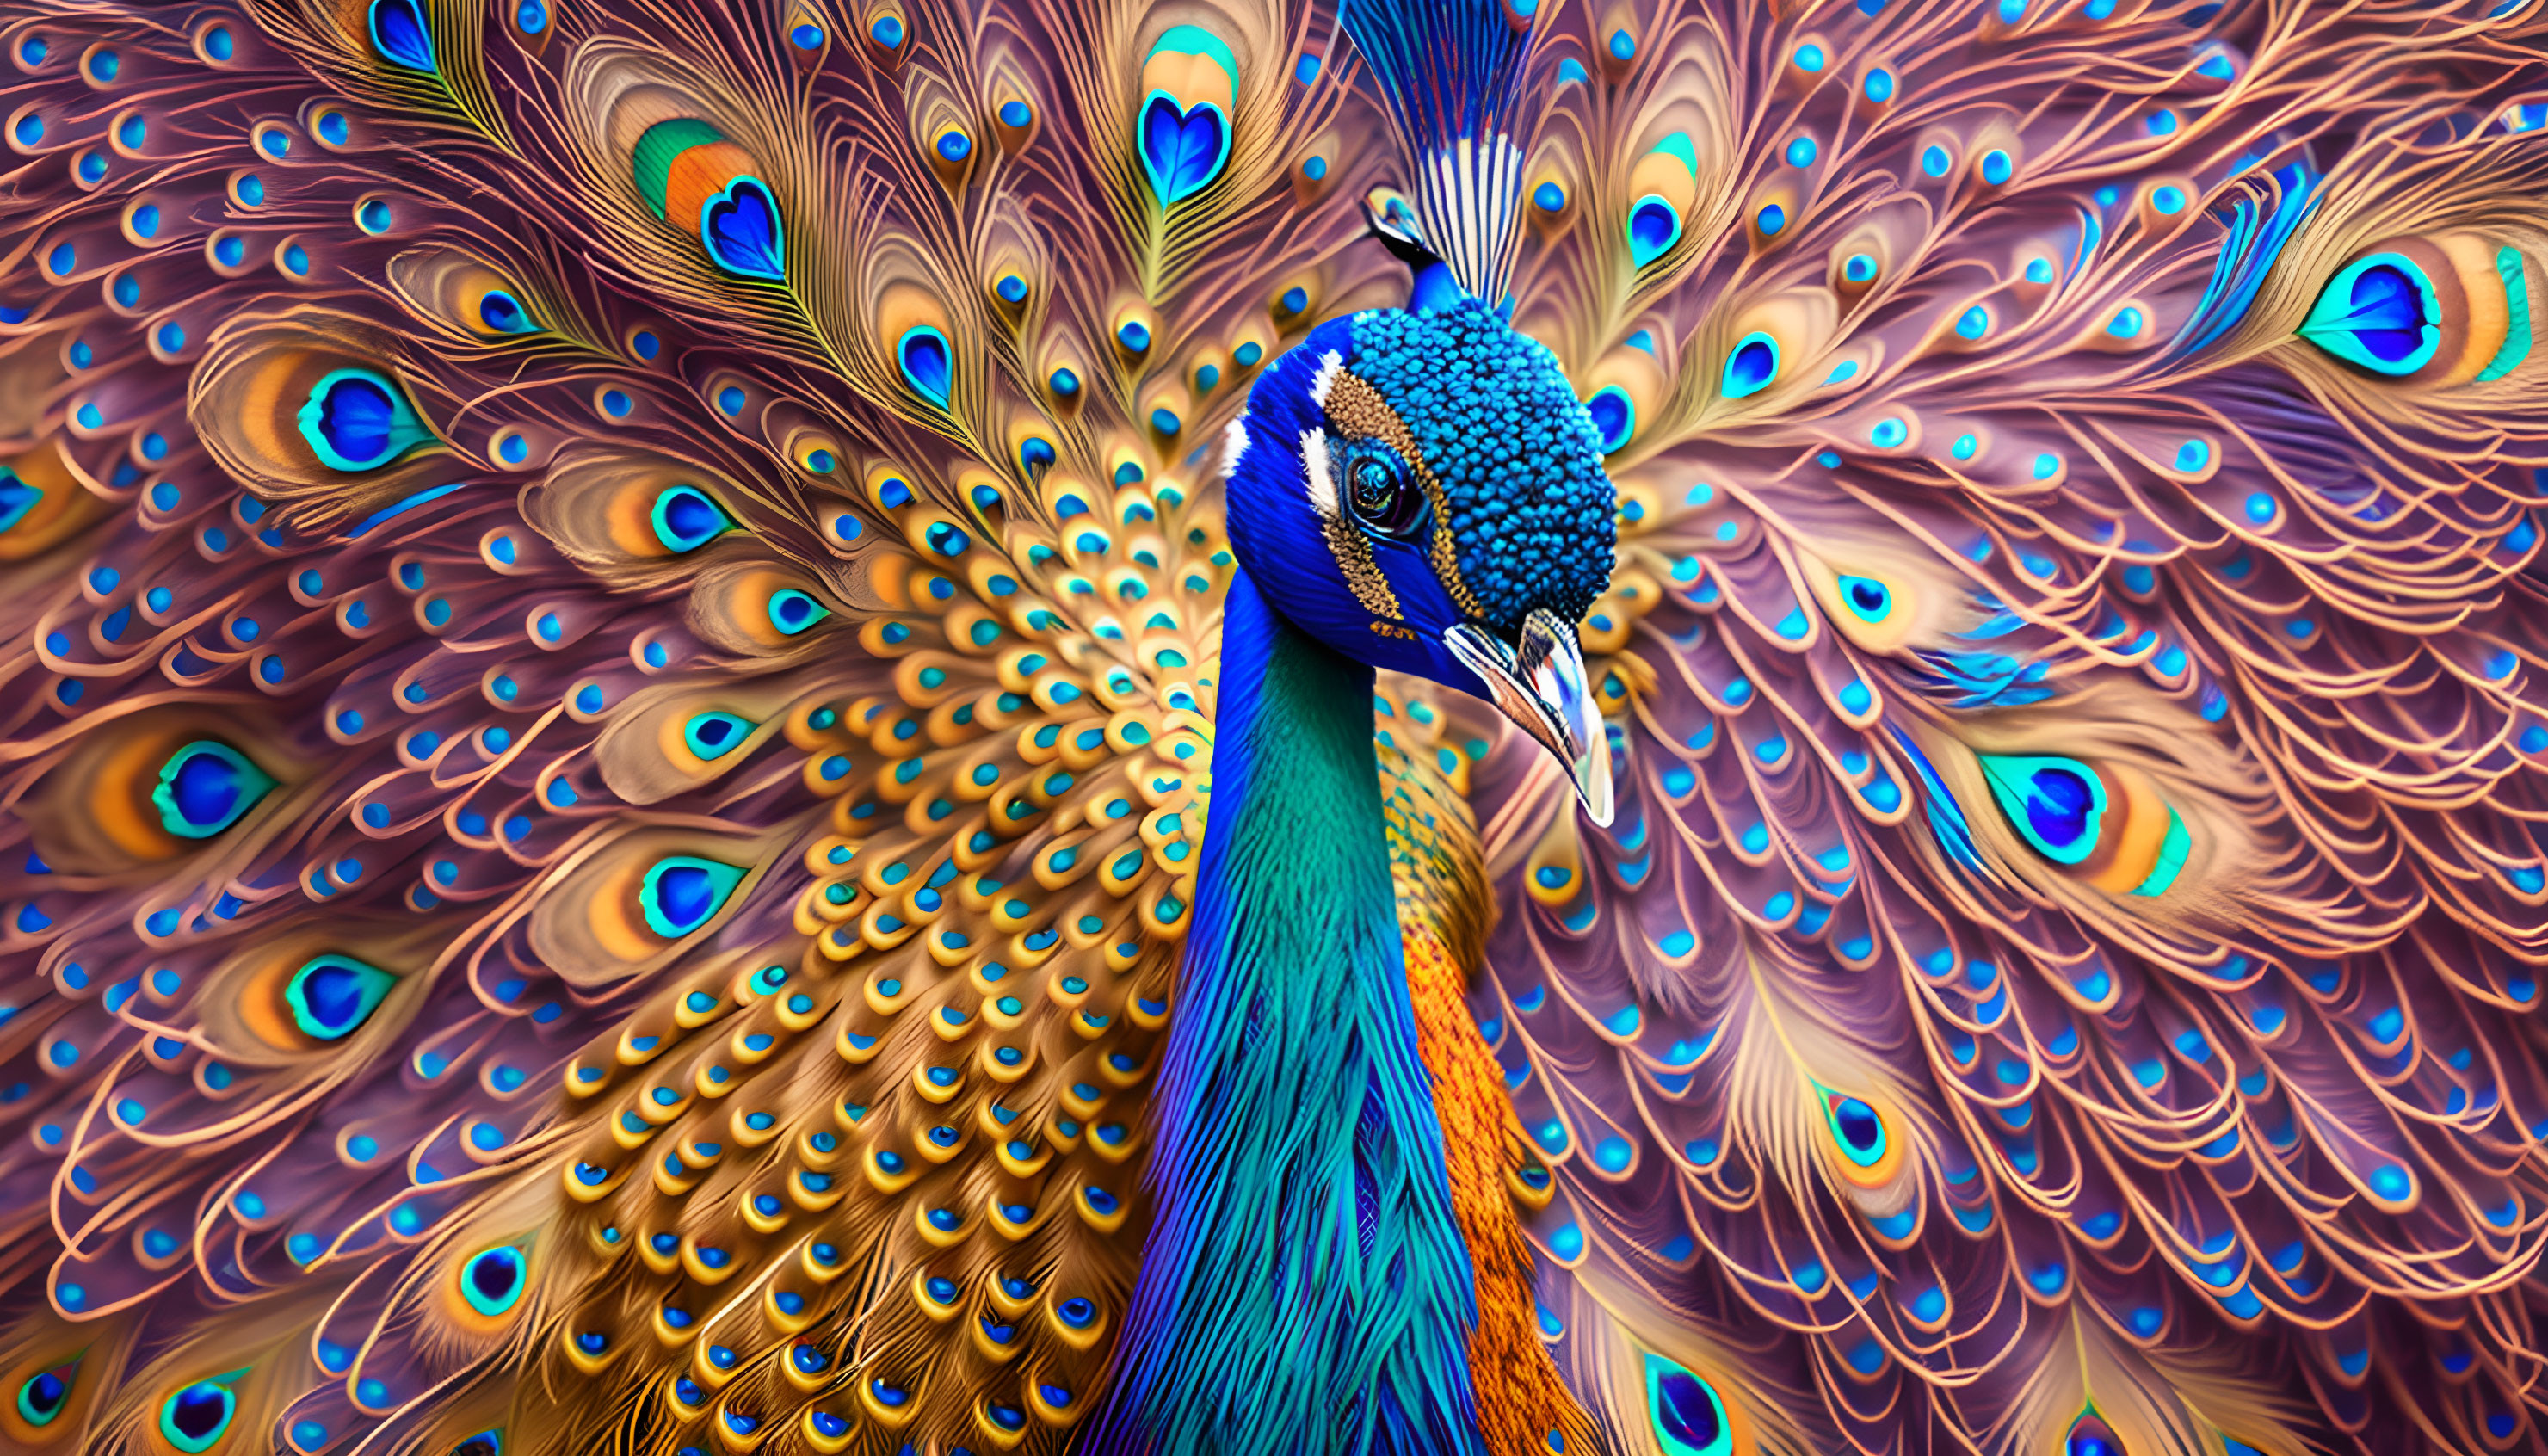 Colorful Peacock with Vibrant Blues, Greens, and Golds